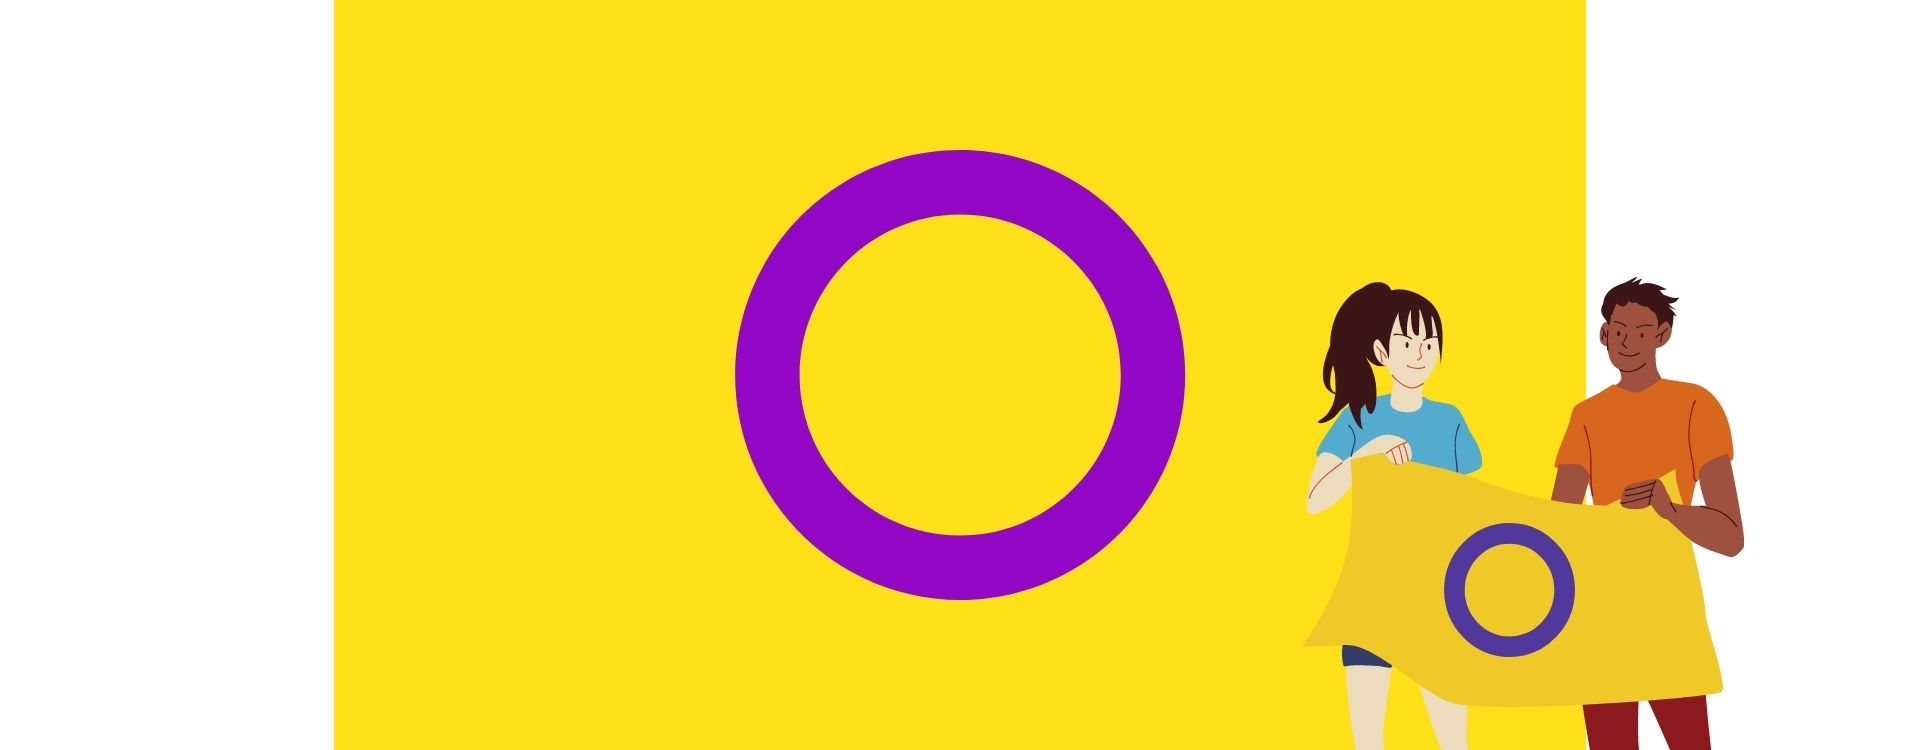 Intersex - what is rainbow flag